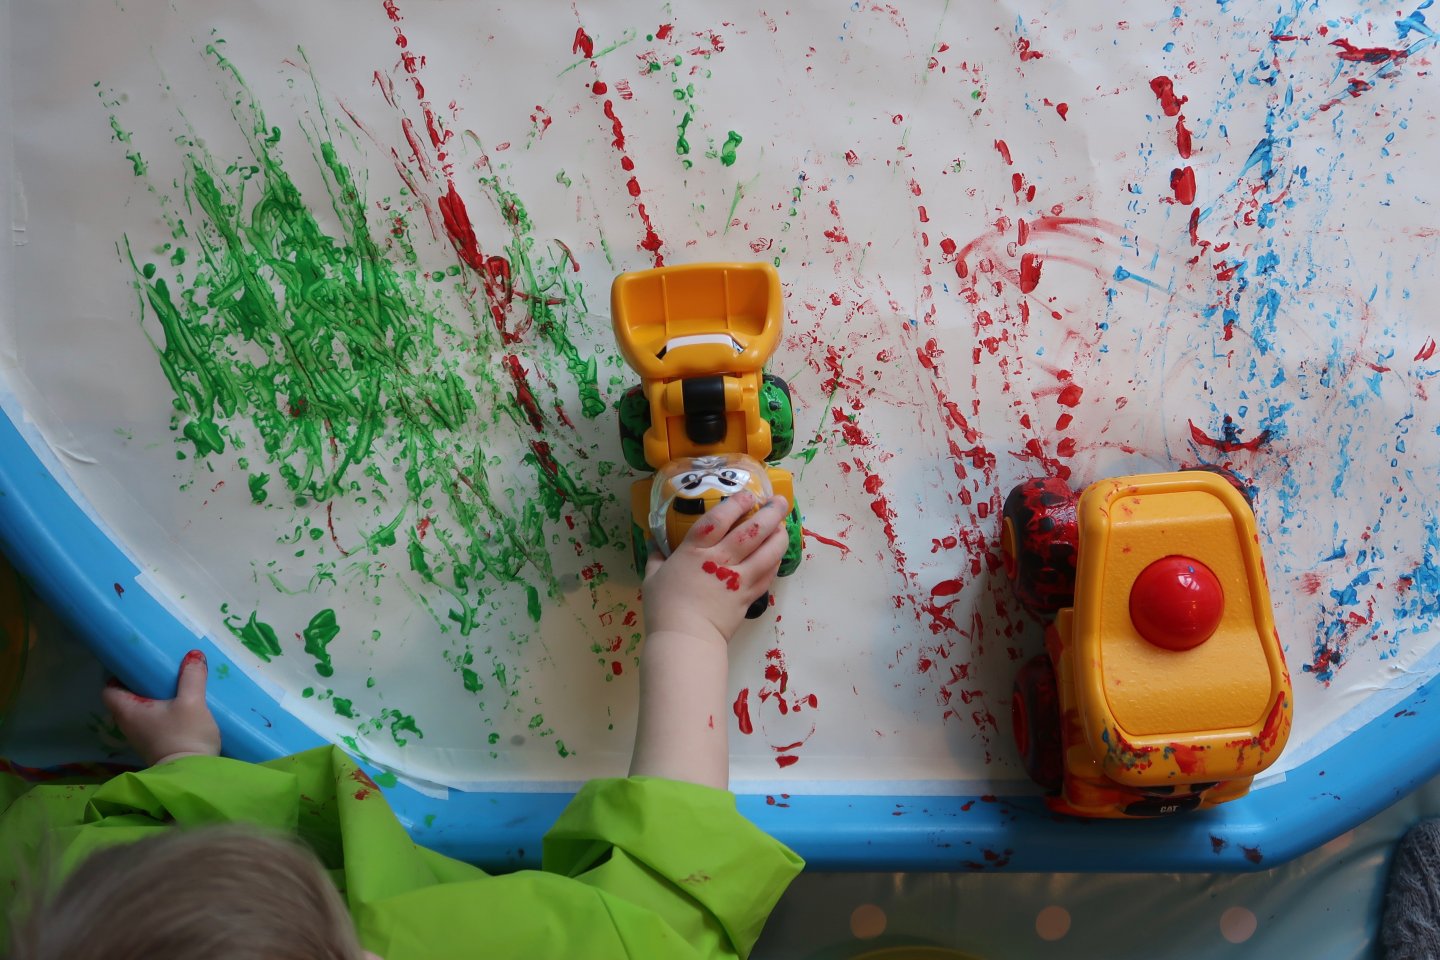 Tantrums To Smiles: 10 Play Ideas for the Tuff Tray!